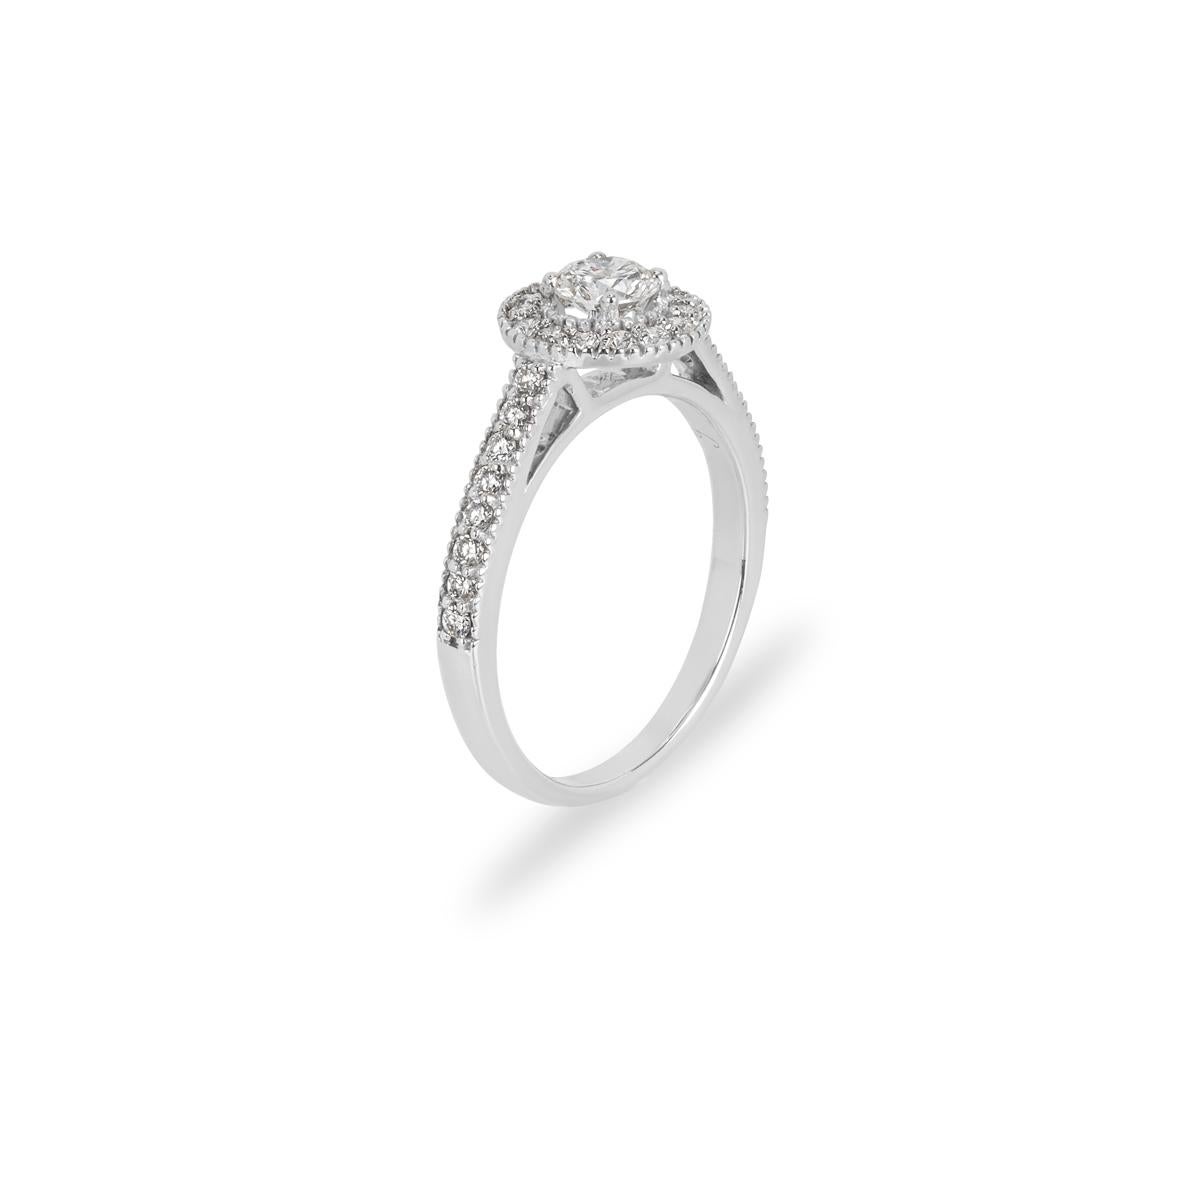 A sparkly 18k white gold diamond ring. The ring comprises of a round brilliant cut diamond in the centre weighing 0.41ct, H colour and VS in clarity. The centre diamond is accentuated by a halo of round brilliant cut diamonds, complemented by pave